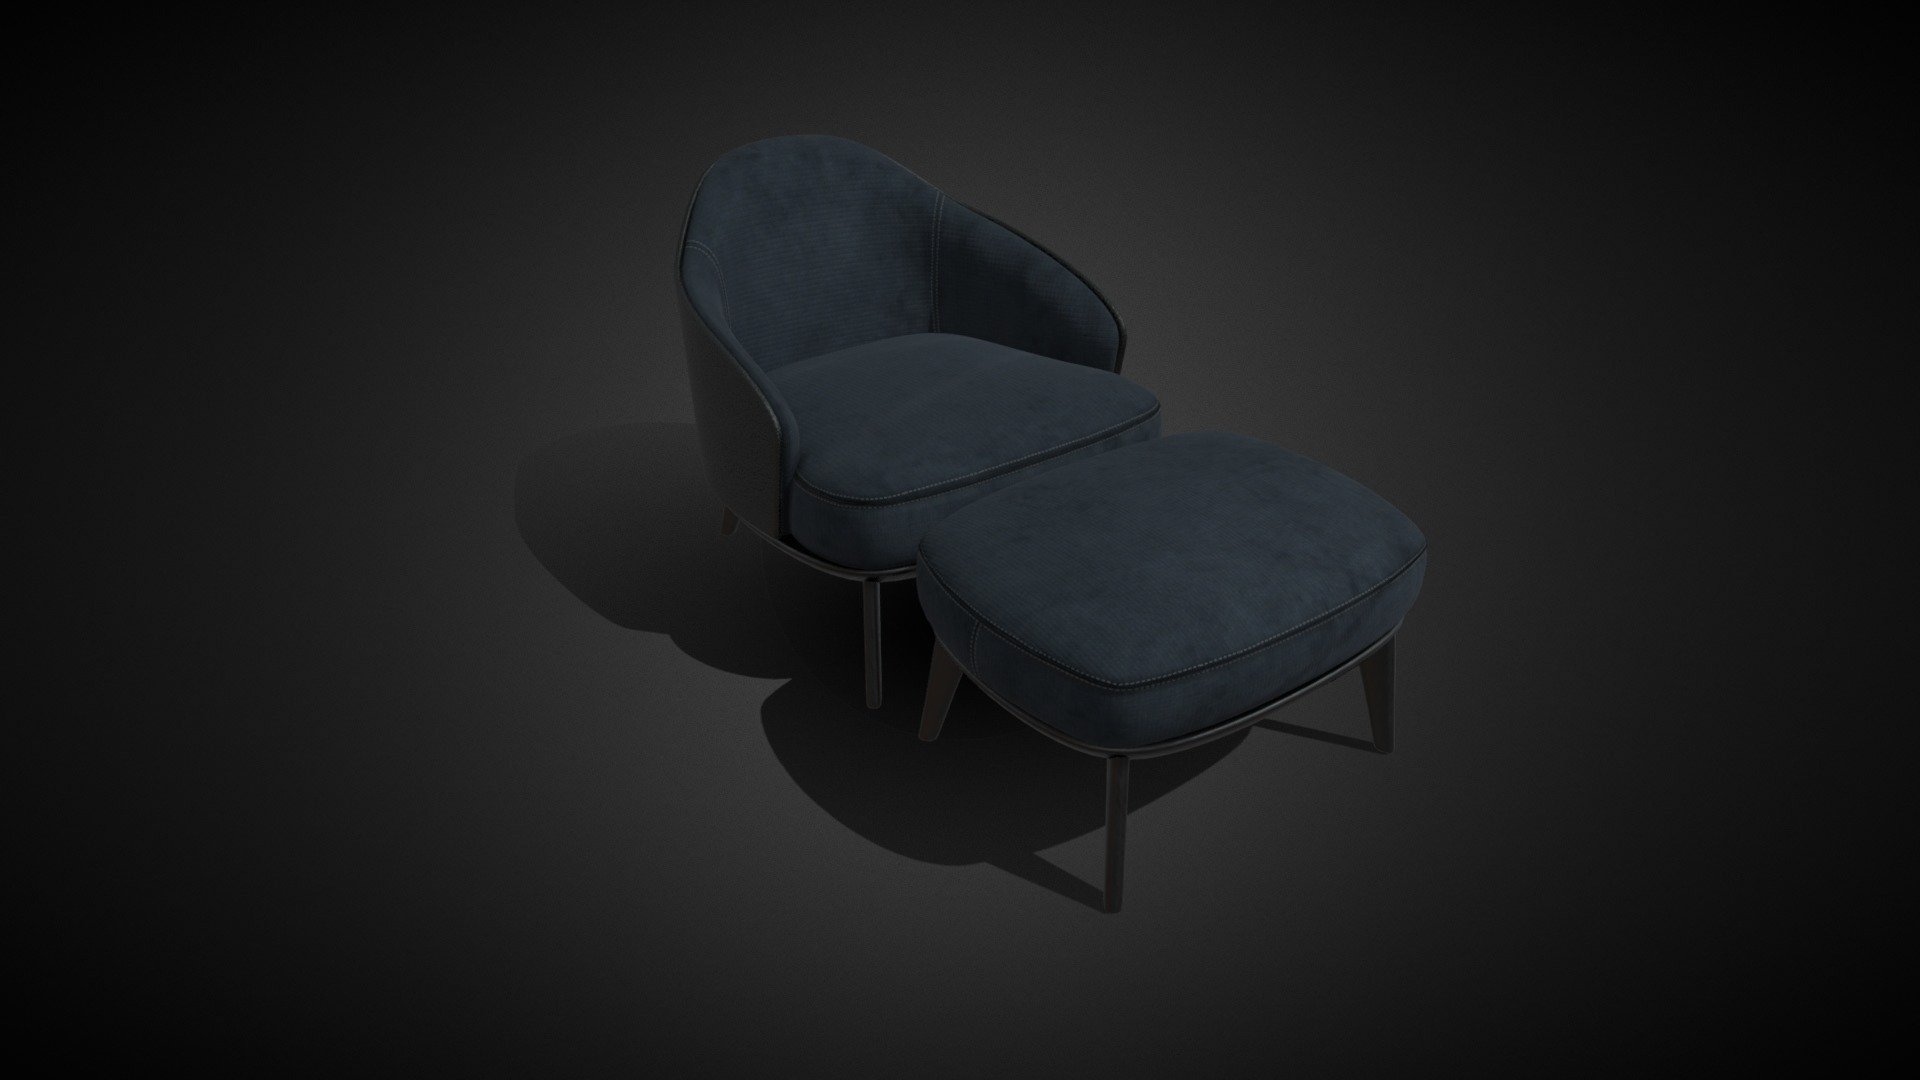 3d model of a Minotti leslie armchair . (PBR texture )

This product is made in Blender and ready to render in Cycle. Unit setup is metres and the models are scaled to match real life objects. 

The model comes with textures and materials and is positioned in the center of the coordinates system.


No additional plugin is needed to open the model.




Notes:



Geometry: Polygonal

Textures: Yes 

Rigged: No

Animated: No

UV Mapped: Yes

Unwrapped UVs: Yes, non-overlapping


Bake normal map




Note: don't forget to take a few seconds to rate this product, your support will allow me to continue working .
Thanks in advance for your help and happy blending!




Hope you like it! Thank you!



My youtube channel : toss90 - Minotti Leslie Armchair - Buy Royalty Free 3D model by Toss90 3d model